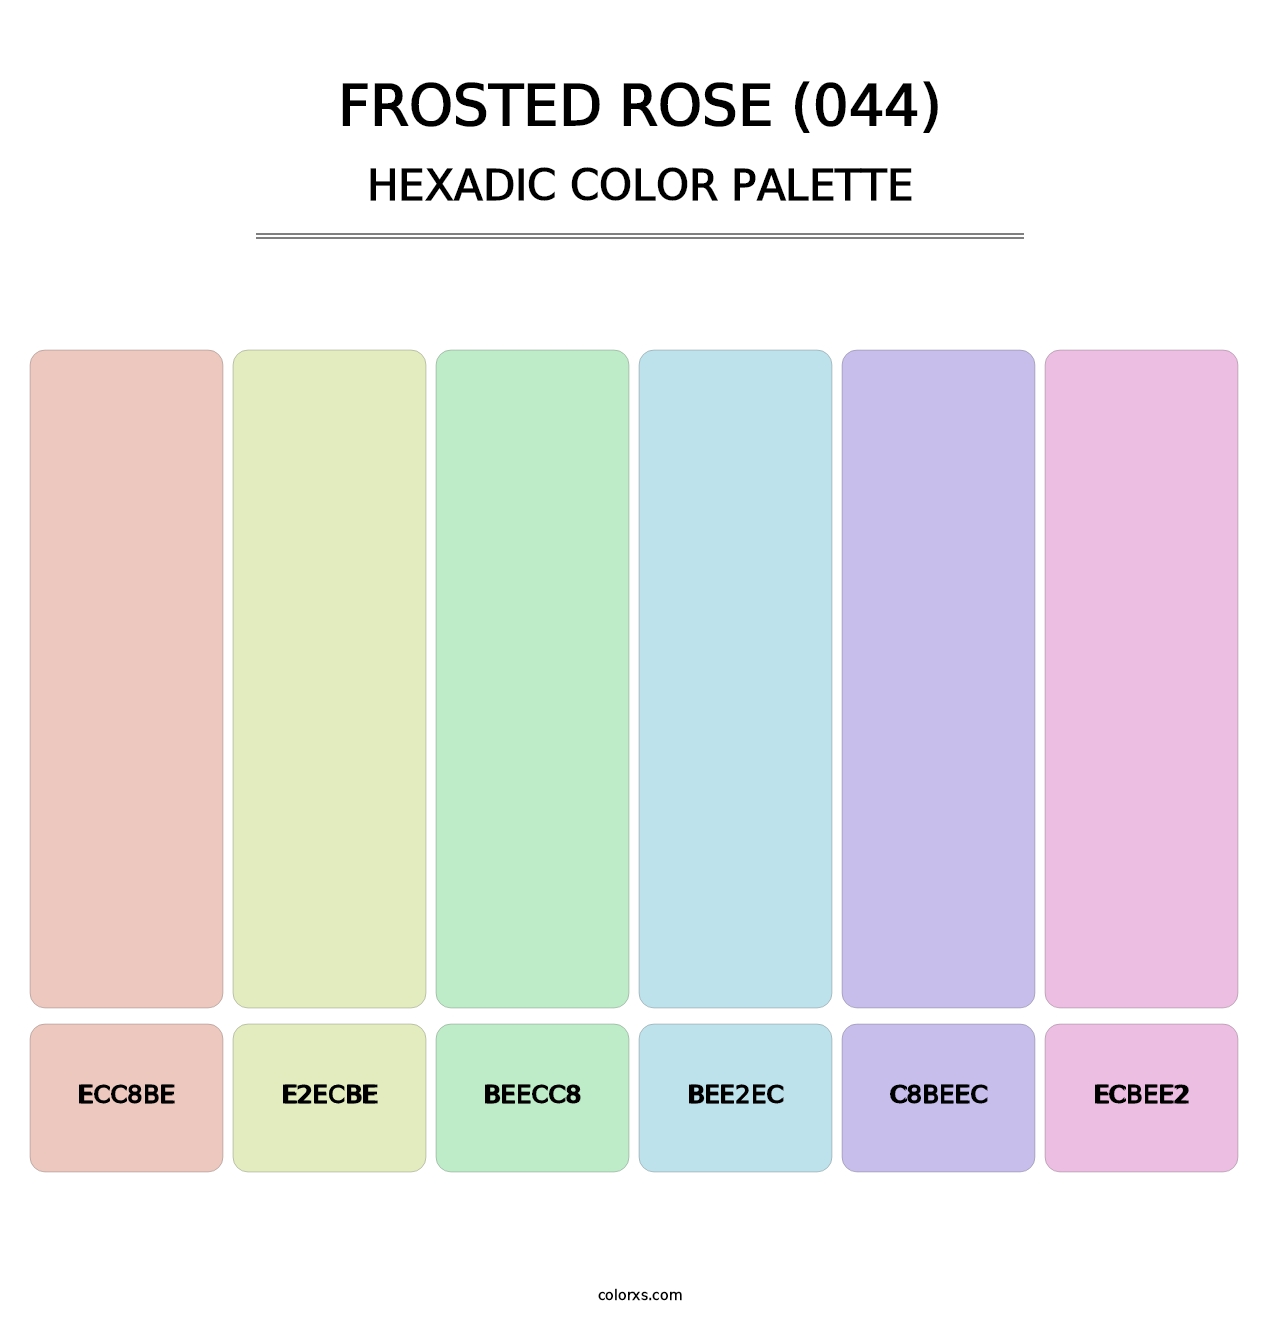 Frosted Rose (044) - Hexadic Color Palette